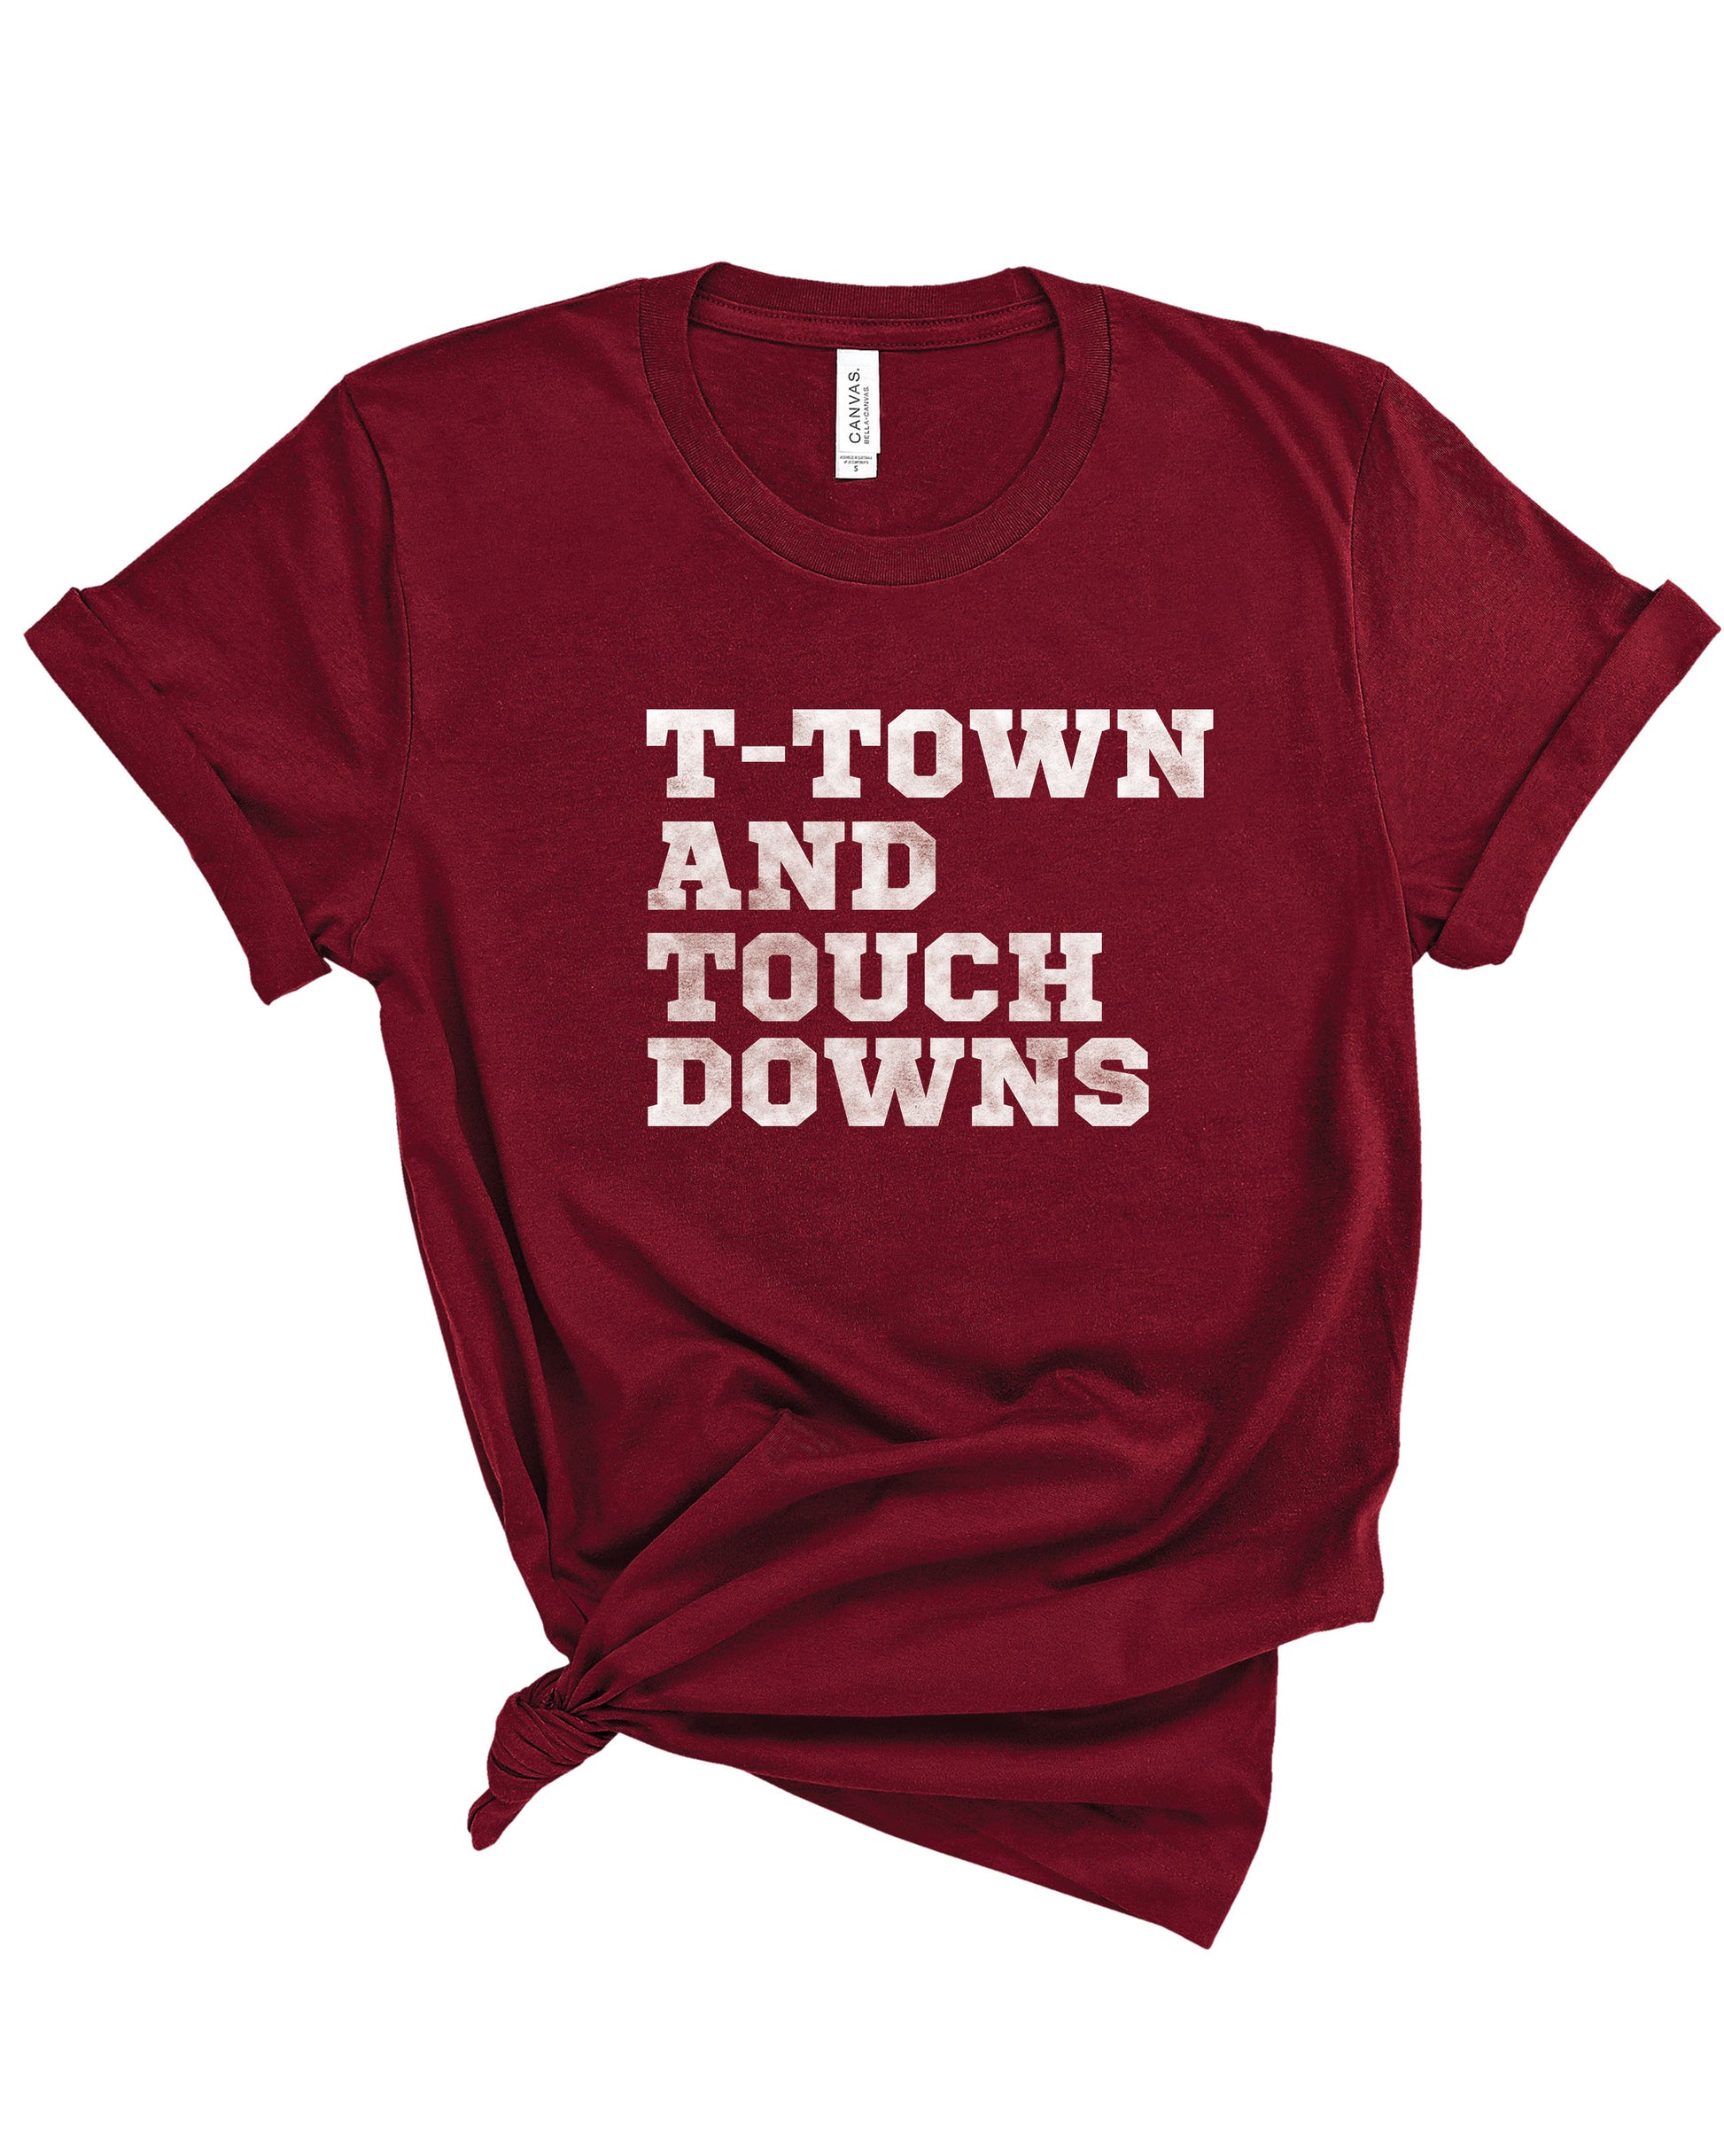 T-Town and Touchdowns | Adult Tee-Adult Tee-Sister Shirts-Sister Shirts, Cute & Custom Tees for Mama & Littles in Trussville, Alabama.